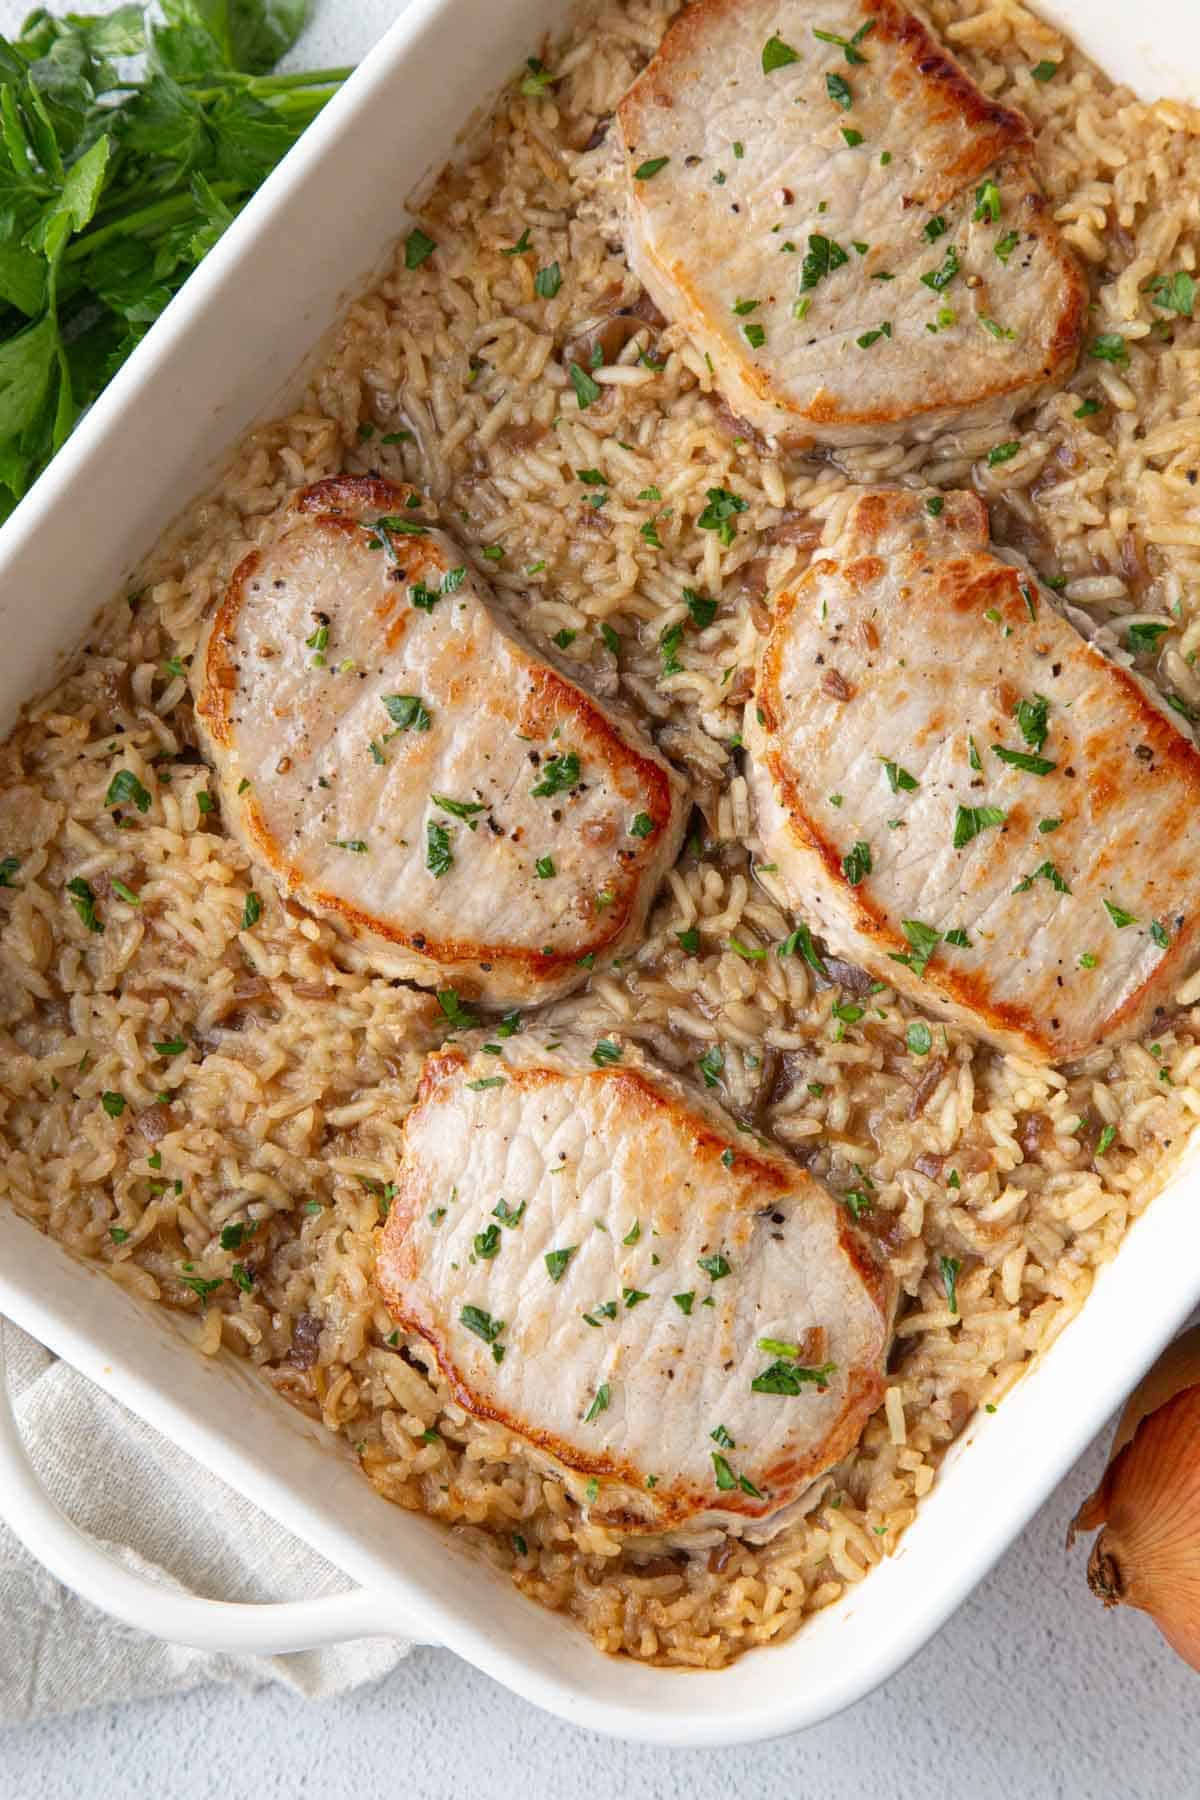 pork chops and rice casserole in a white dish, topped with parsley.